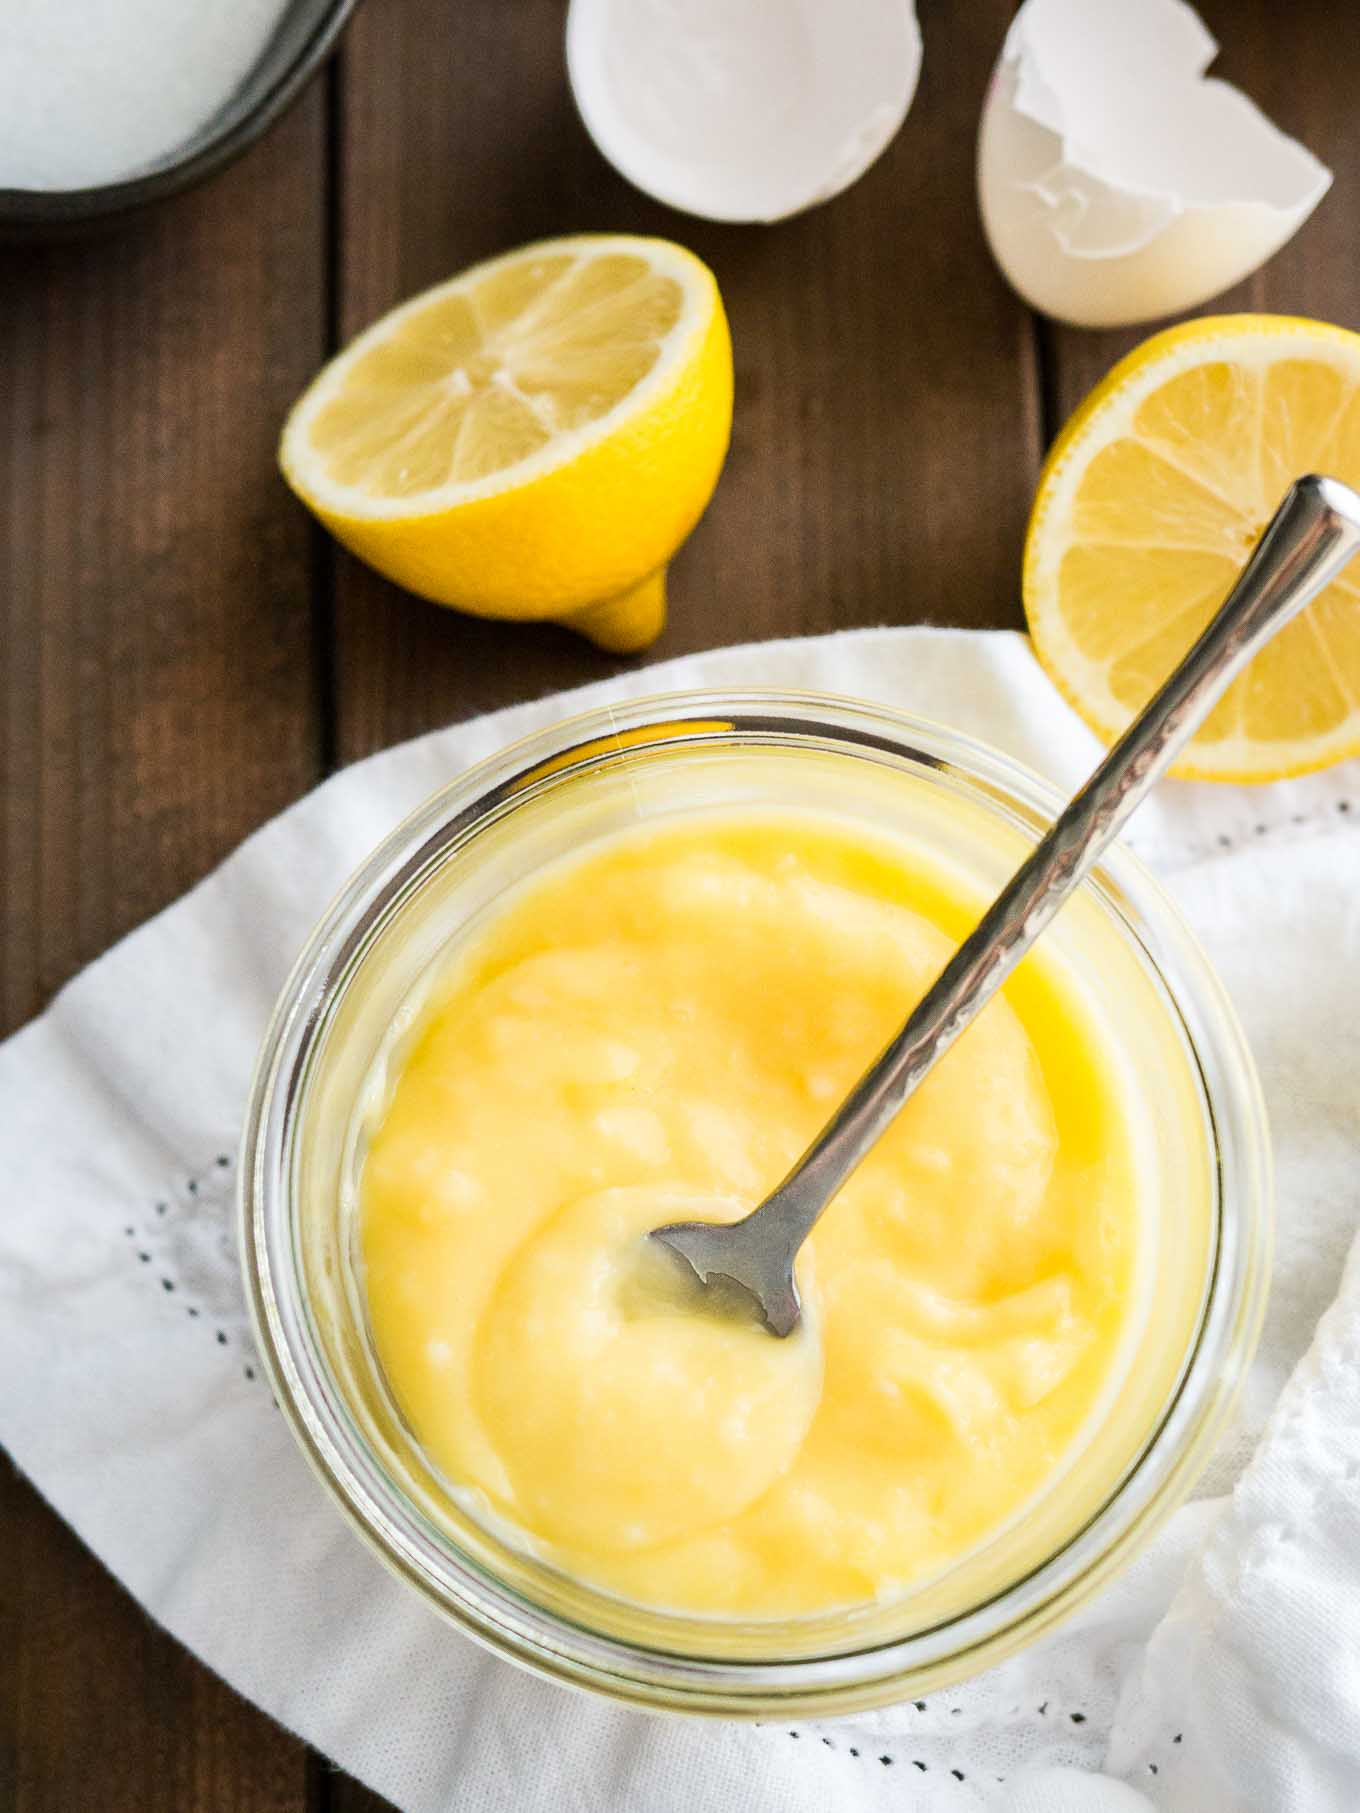 Top-down shot of a glass jar of lemon curd with a spoon in it on a white dishtowel. There are halved lemons and eggshells next to it.